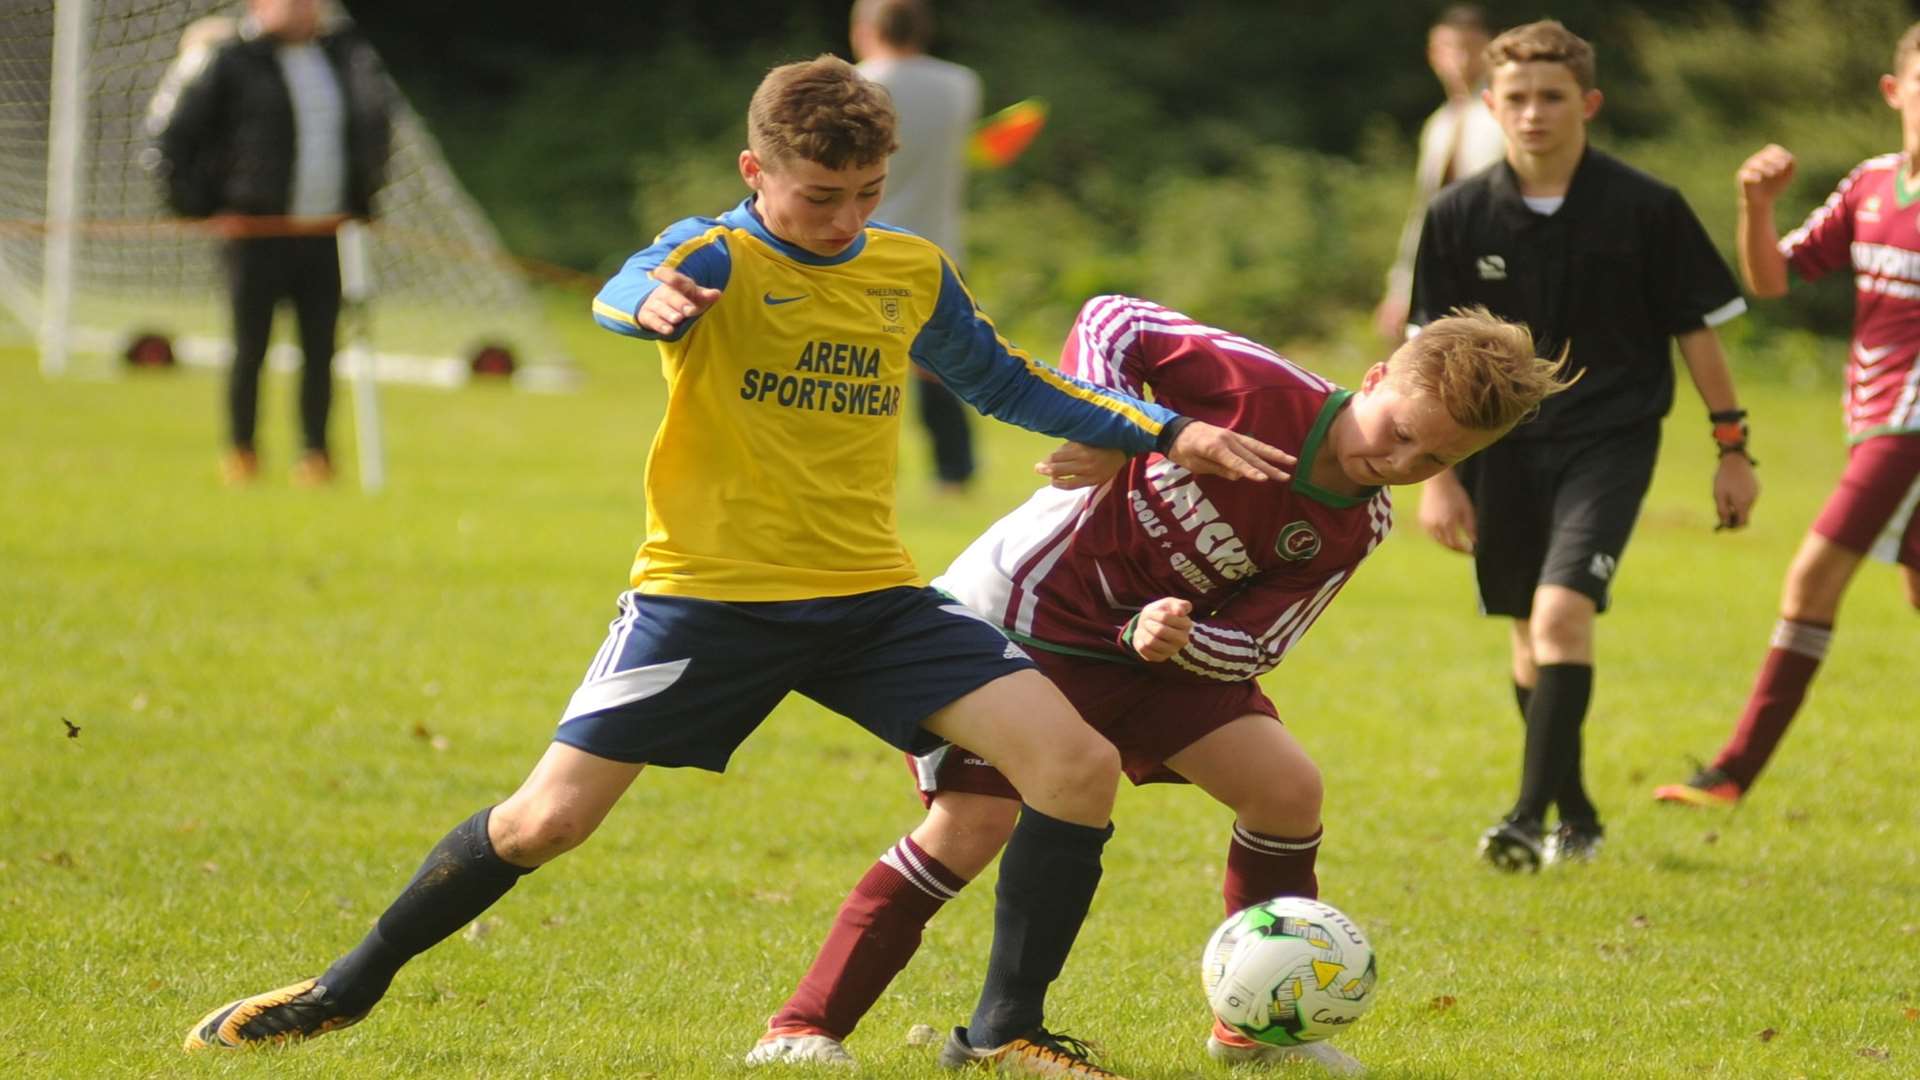 Sheerness East under-14s (yellow) take on Cobham Colts in the League Cup Picture: Steve Crispe